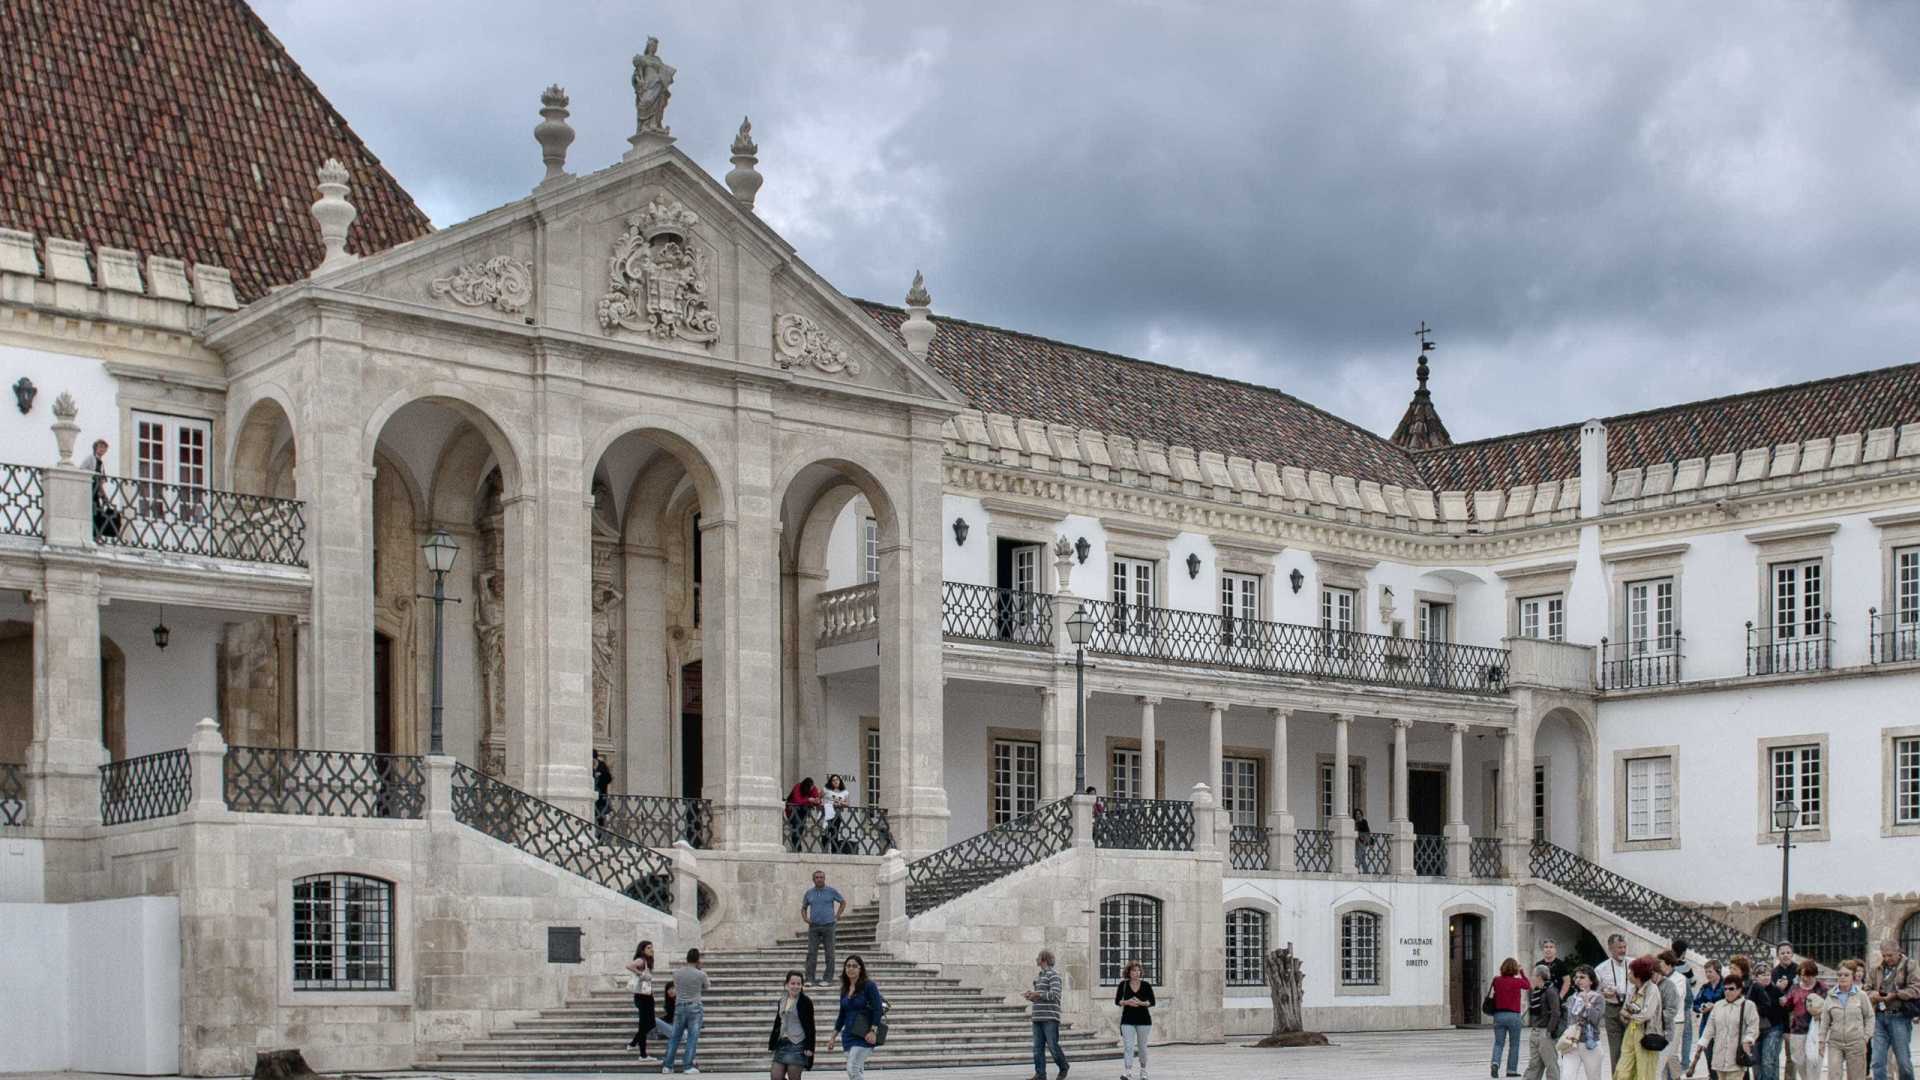 Discover The Most Amazing Historical Places In Portugal  discover Discover The Most Amazing Historical Places In Portugal Universidade de Coimbra